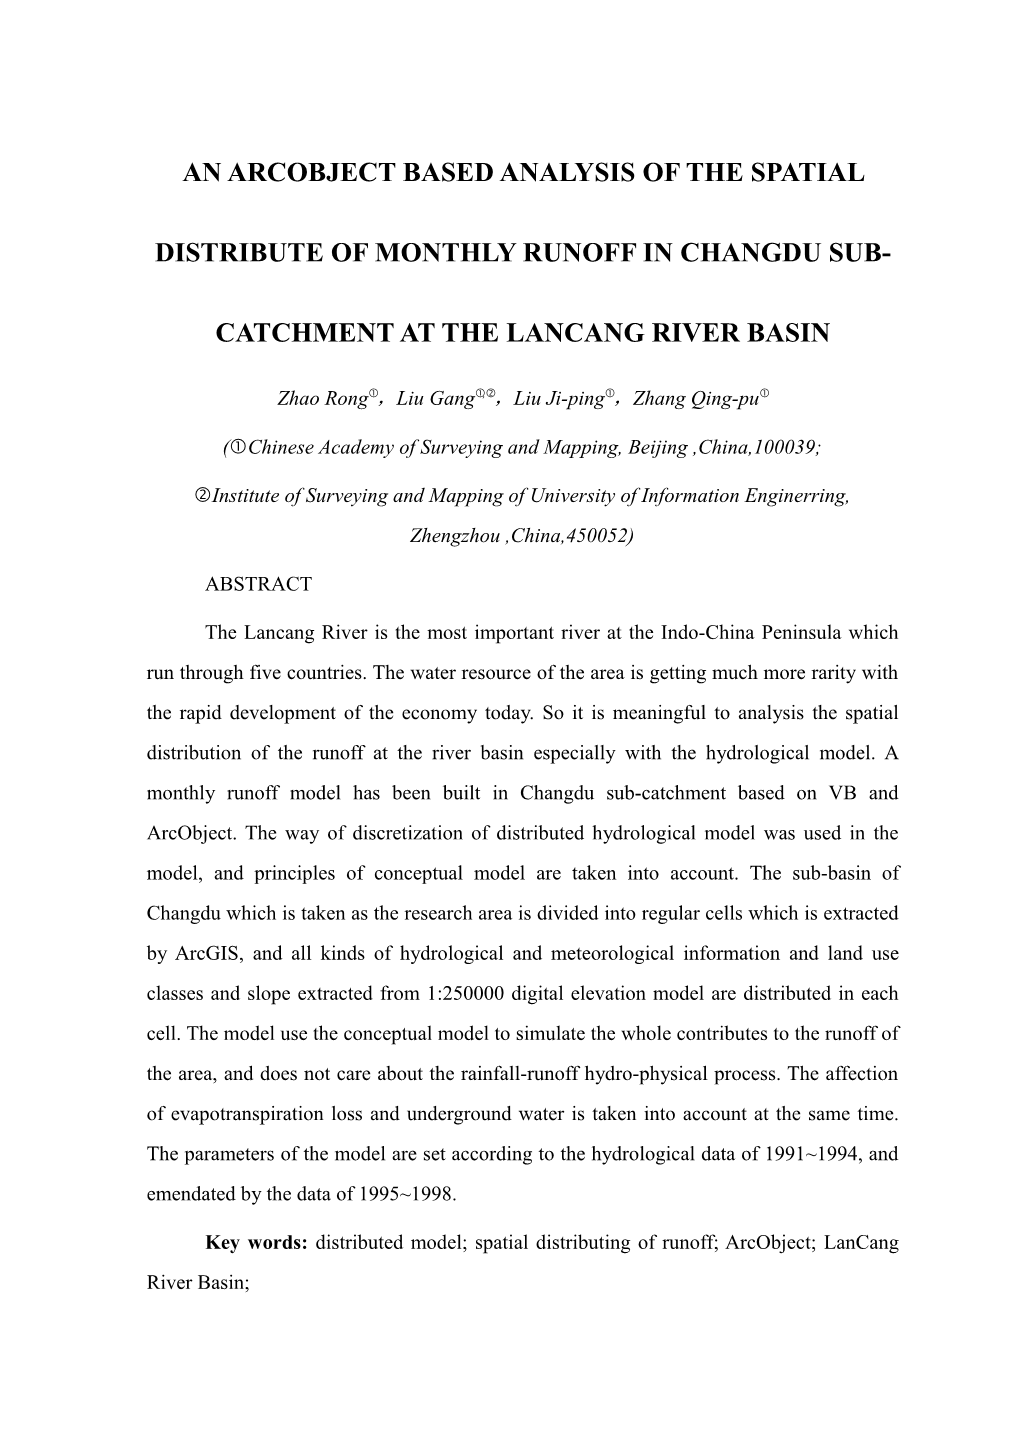 An Arcobject Based Analysis of the Spatial Distribute Model of Monthly Runoff in Changdu